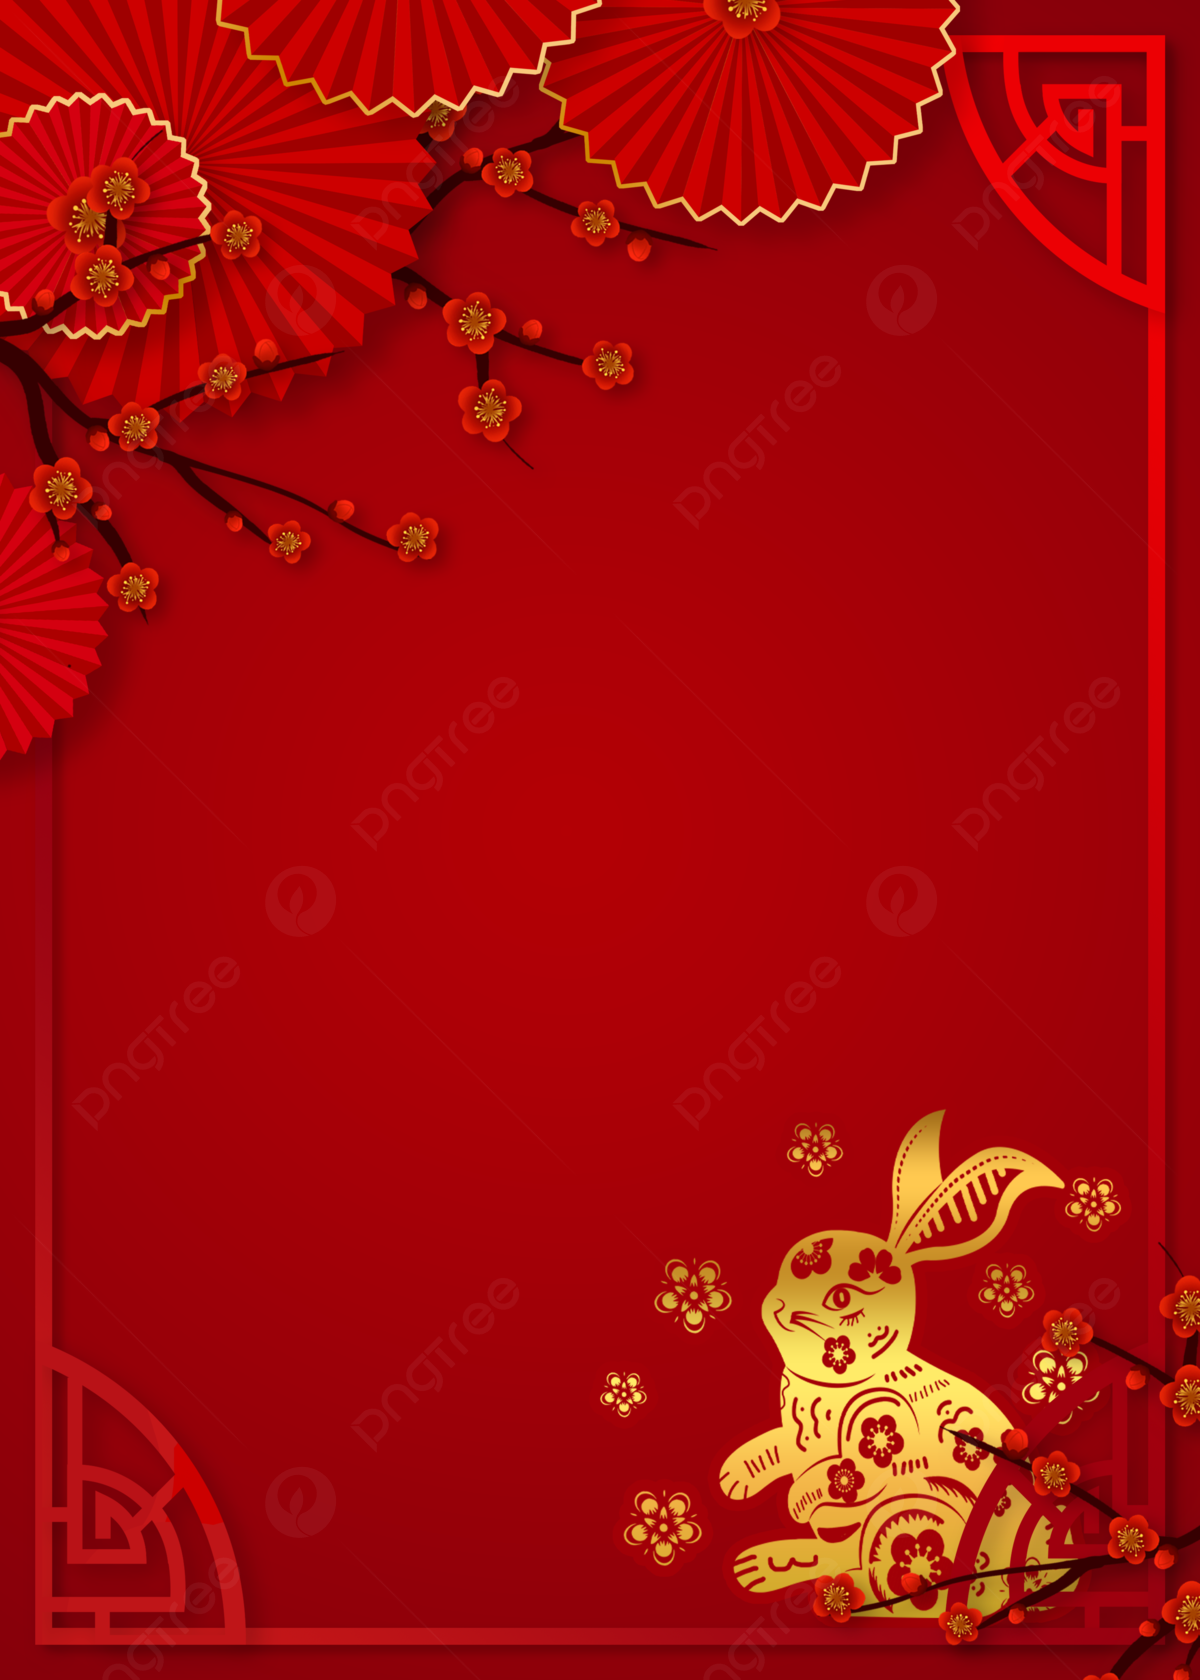 Chinese New Year 2023 Wishes & Year of the Rabbit Images: WhatsApp  Stickers, Lunar New Year GIFs, HD Wallpapers and SMS for the Spring  Festival